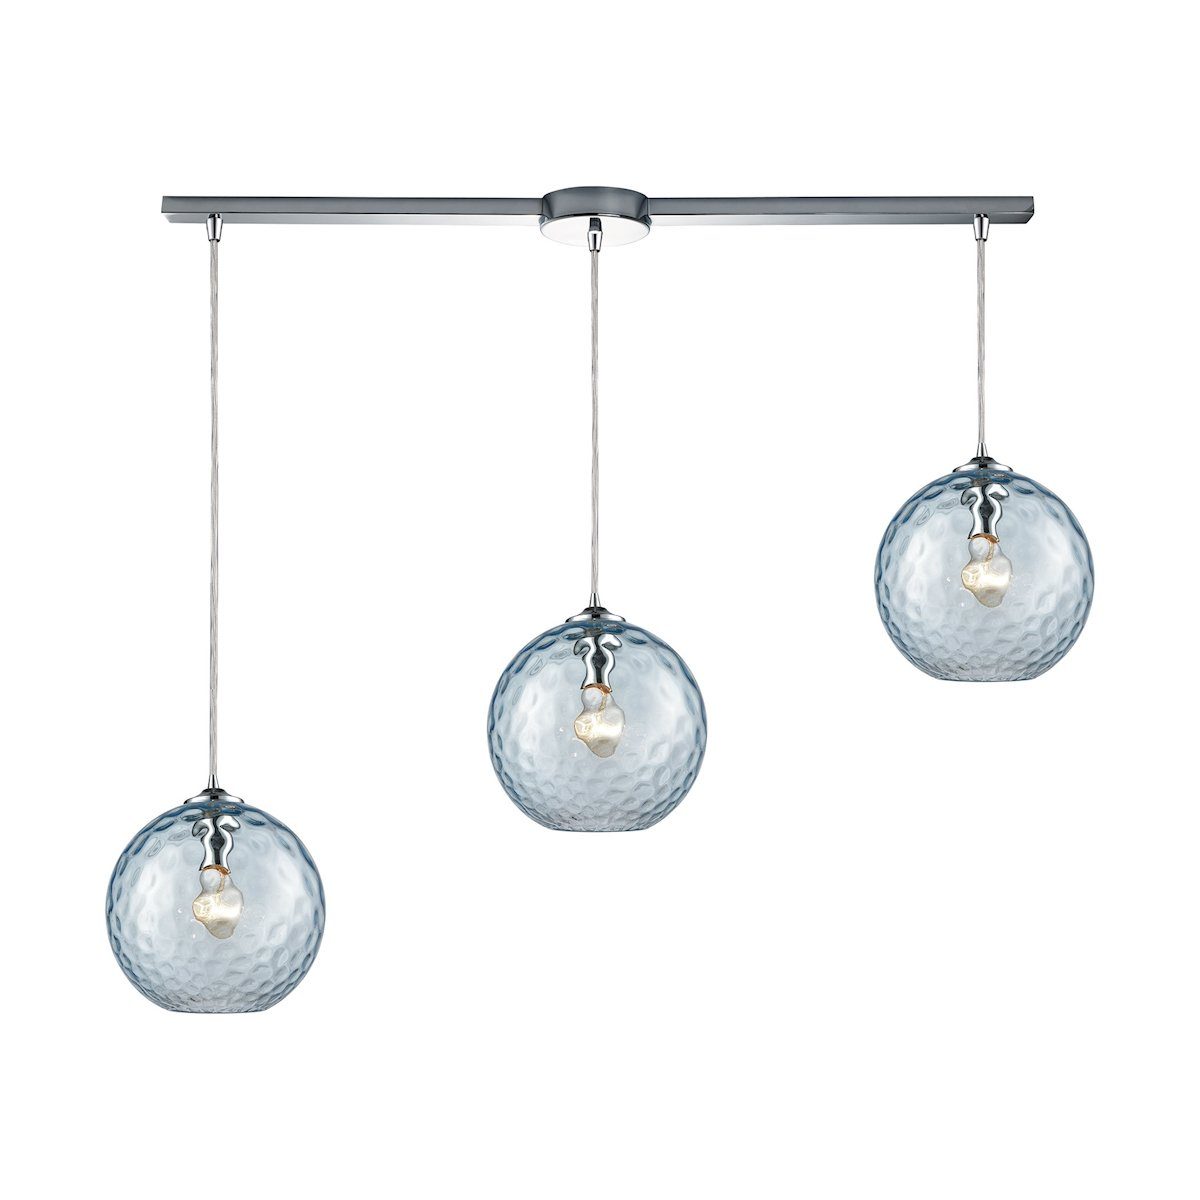 Watersphere 3 Light Linear Bar Fixture In Polished Chrome With Aqua Hammered Glass Ceiling Elk Lighting 